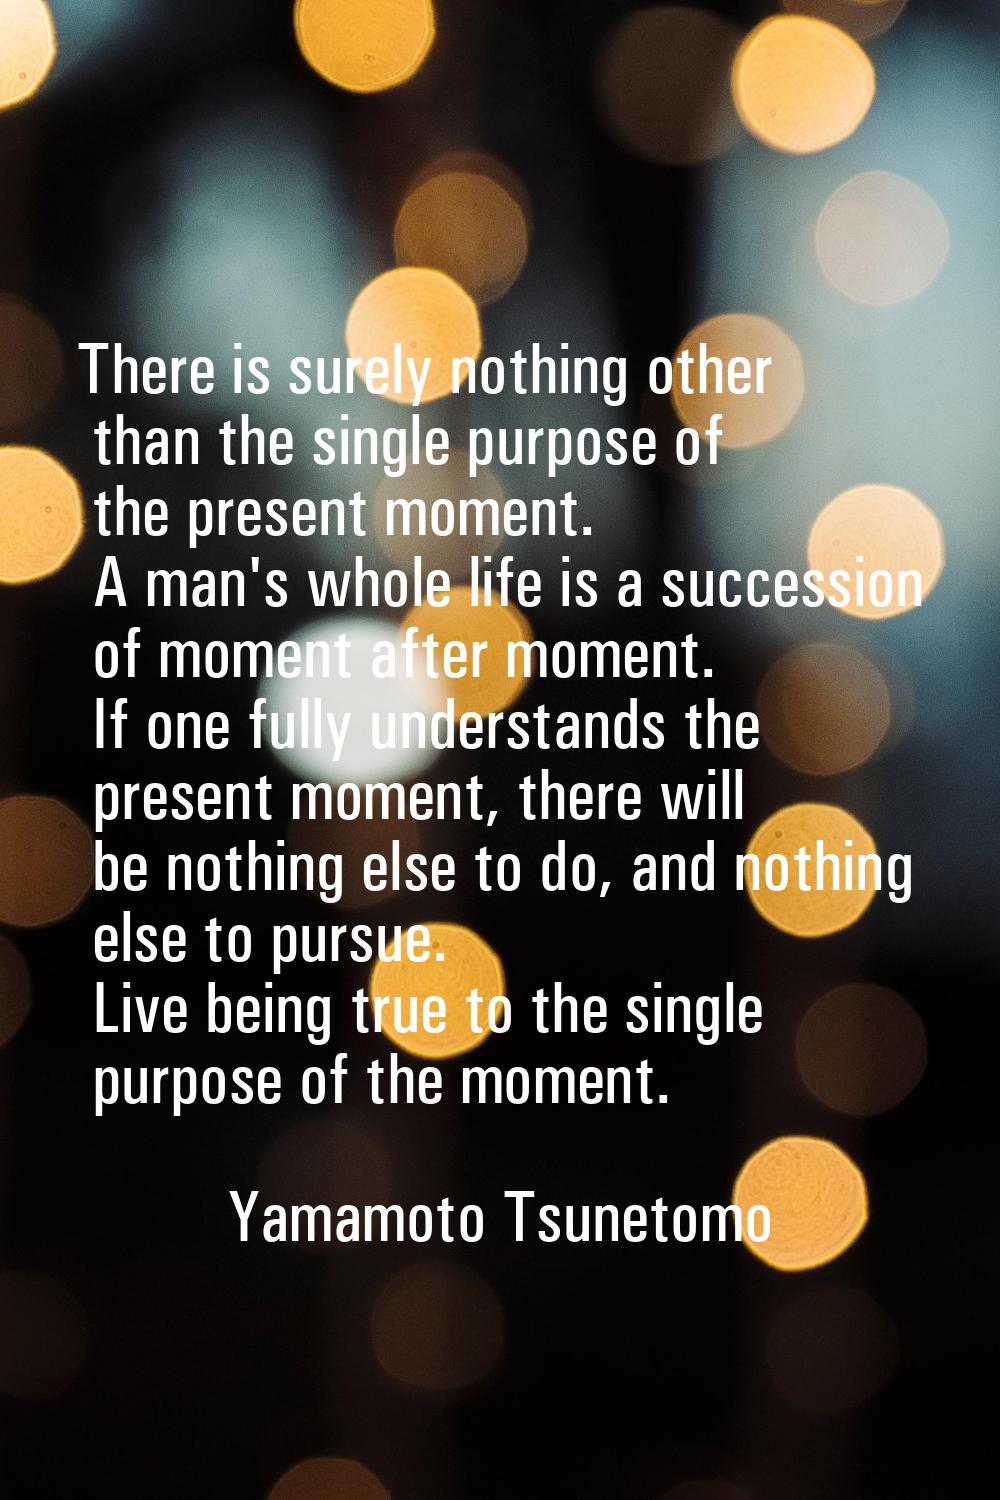 There is surely nothing other than the single purpose of the present moment. A man's whole life is 